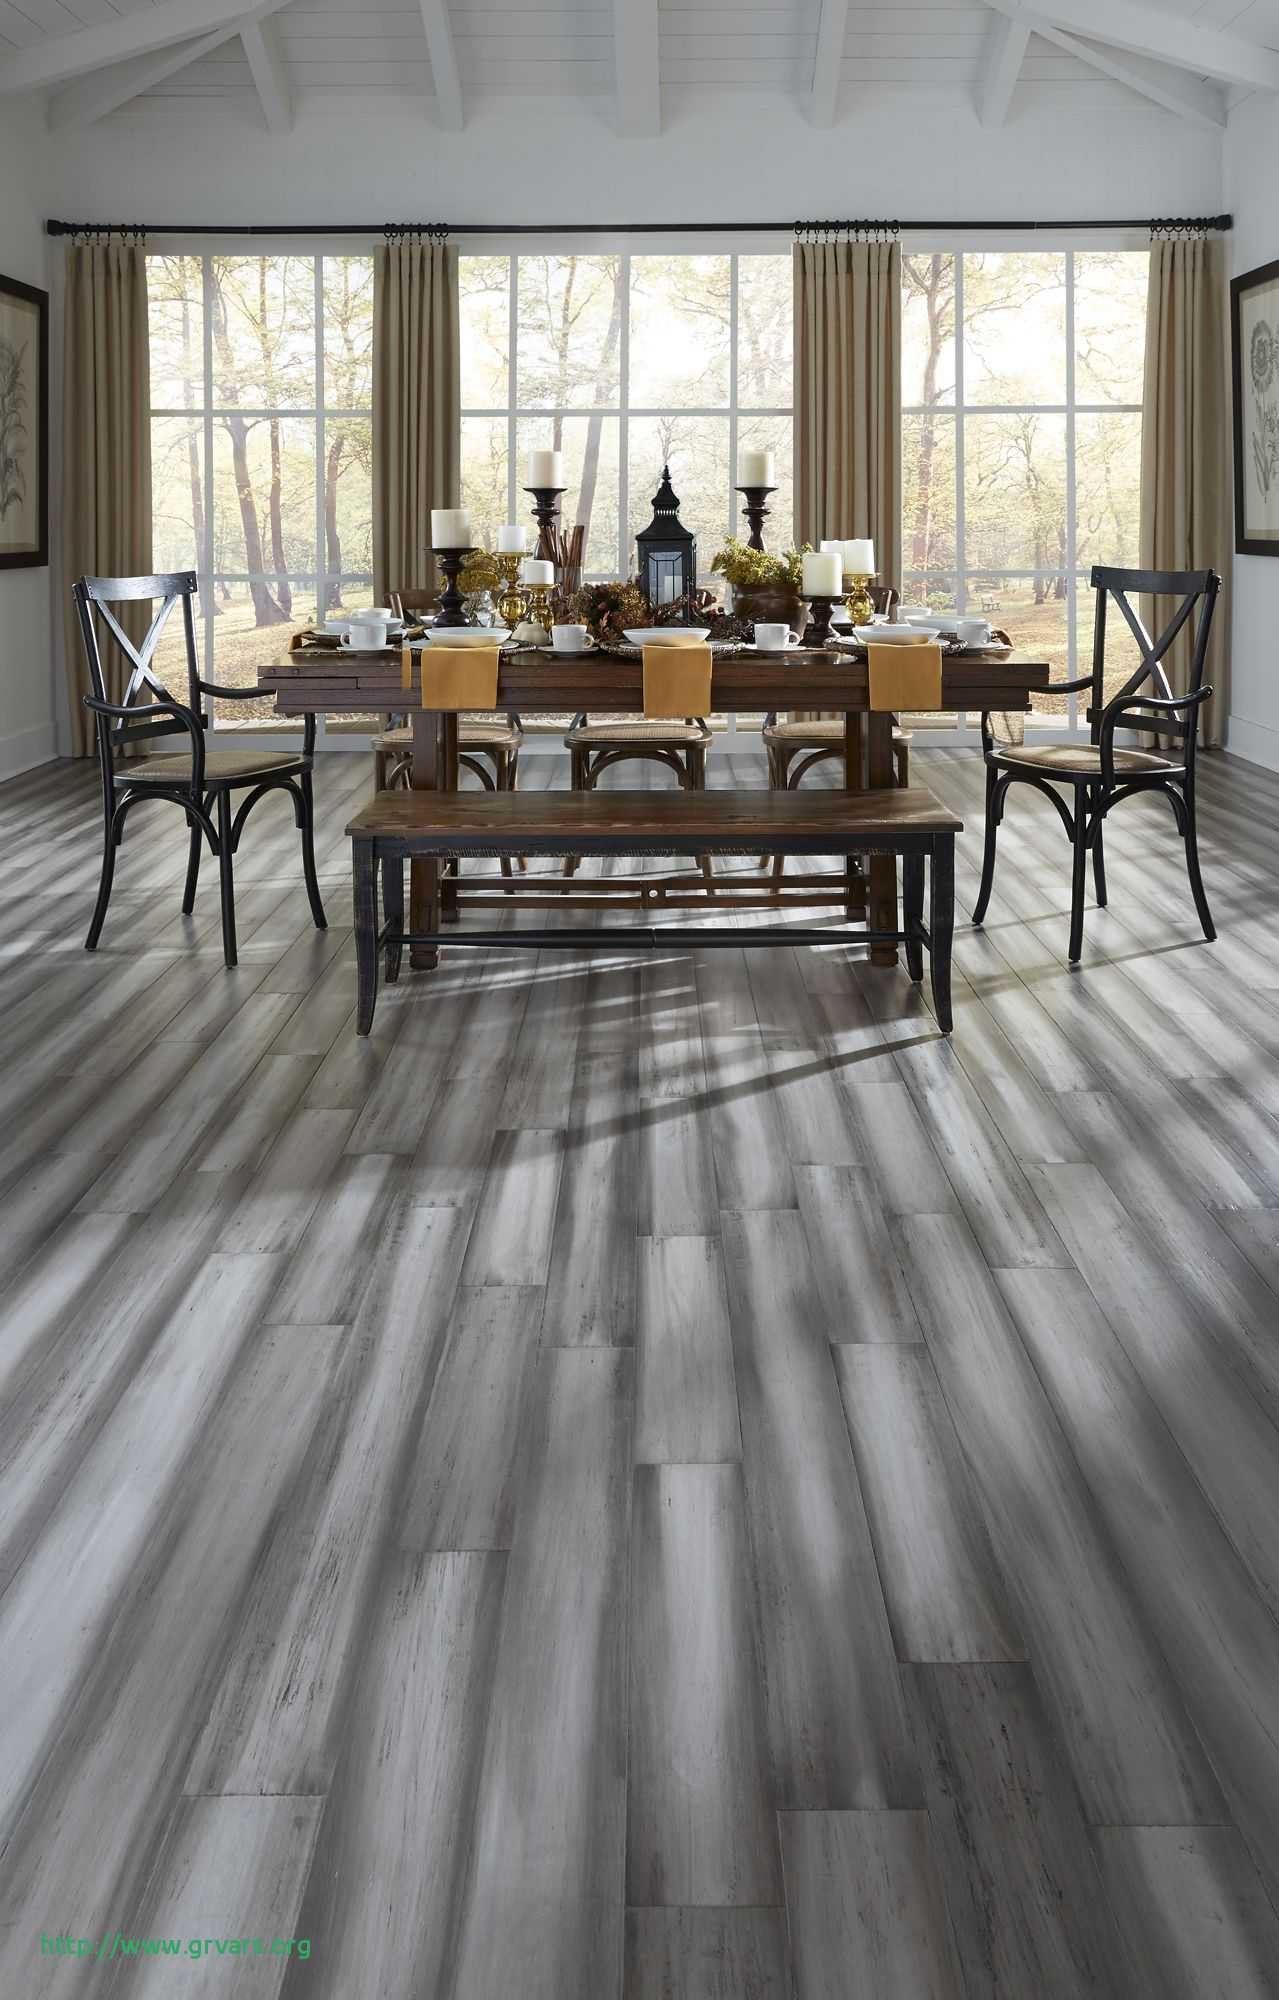 hardwood flooring facts of 20 charmant how to care for bamboo floors ideas blog intended for 20 photos of the 20 charmant how to care for bamboo floors